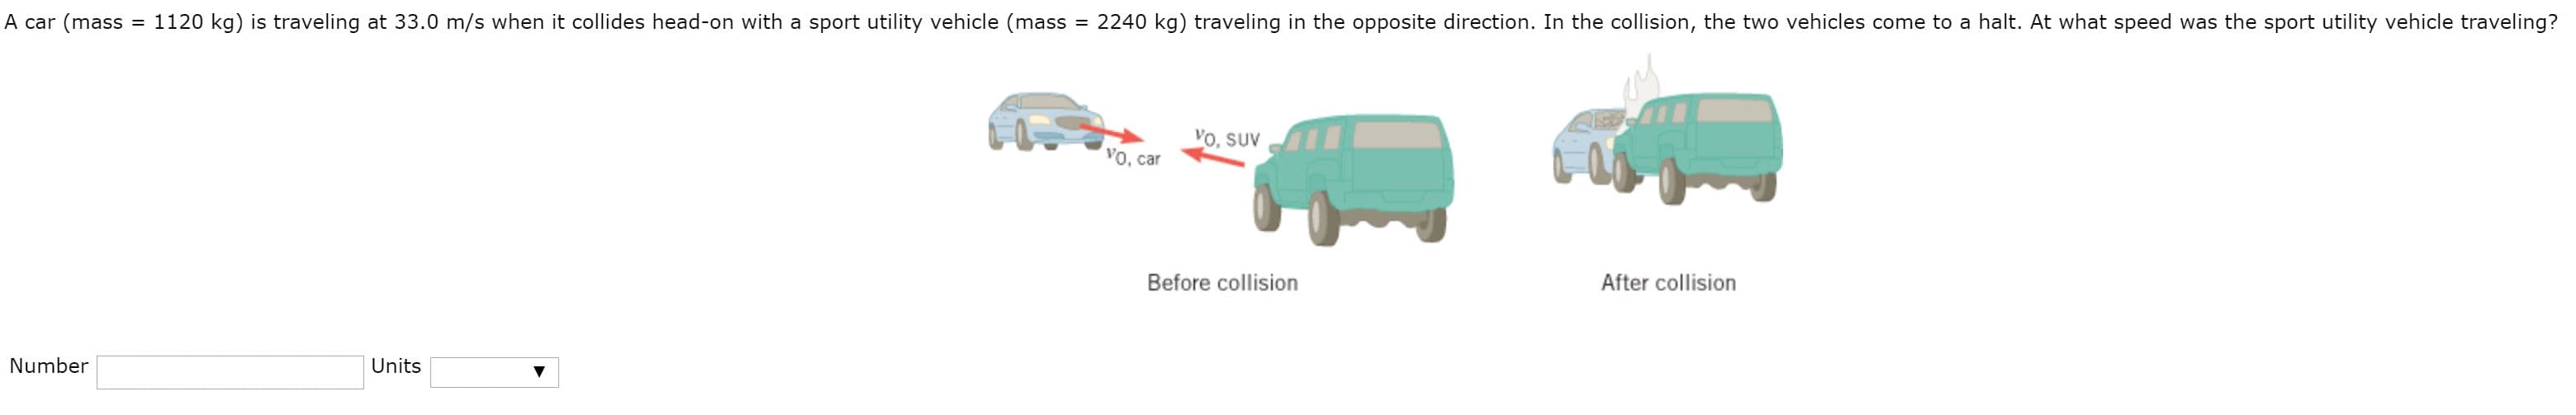 A car (mass = 1120 kg) is traveling at 33.0 m/s when it collides head-on with a sport utility vehicle (mass = 2240 kg) traveling in the opposite direction. In the collision, the two vehicles come to a halt. At what speed was the sport utility vehicle traveling?
%3D
Vo, suV
vo, car
Before collision
After collision
Number
Units
